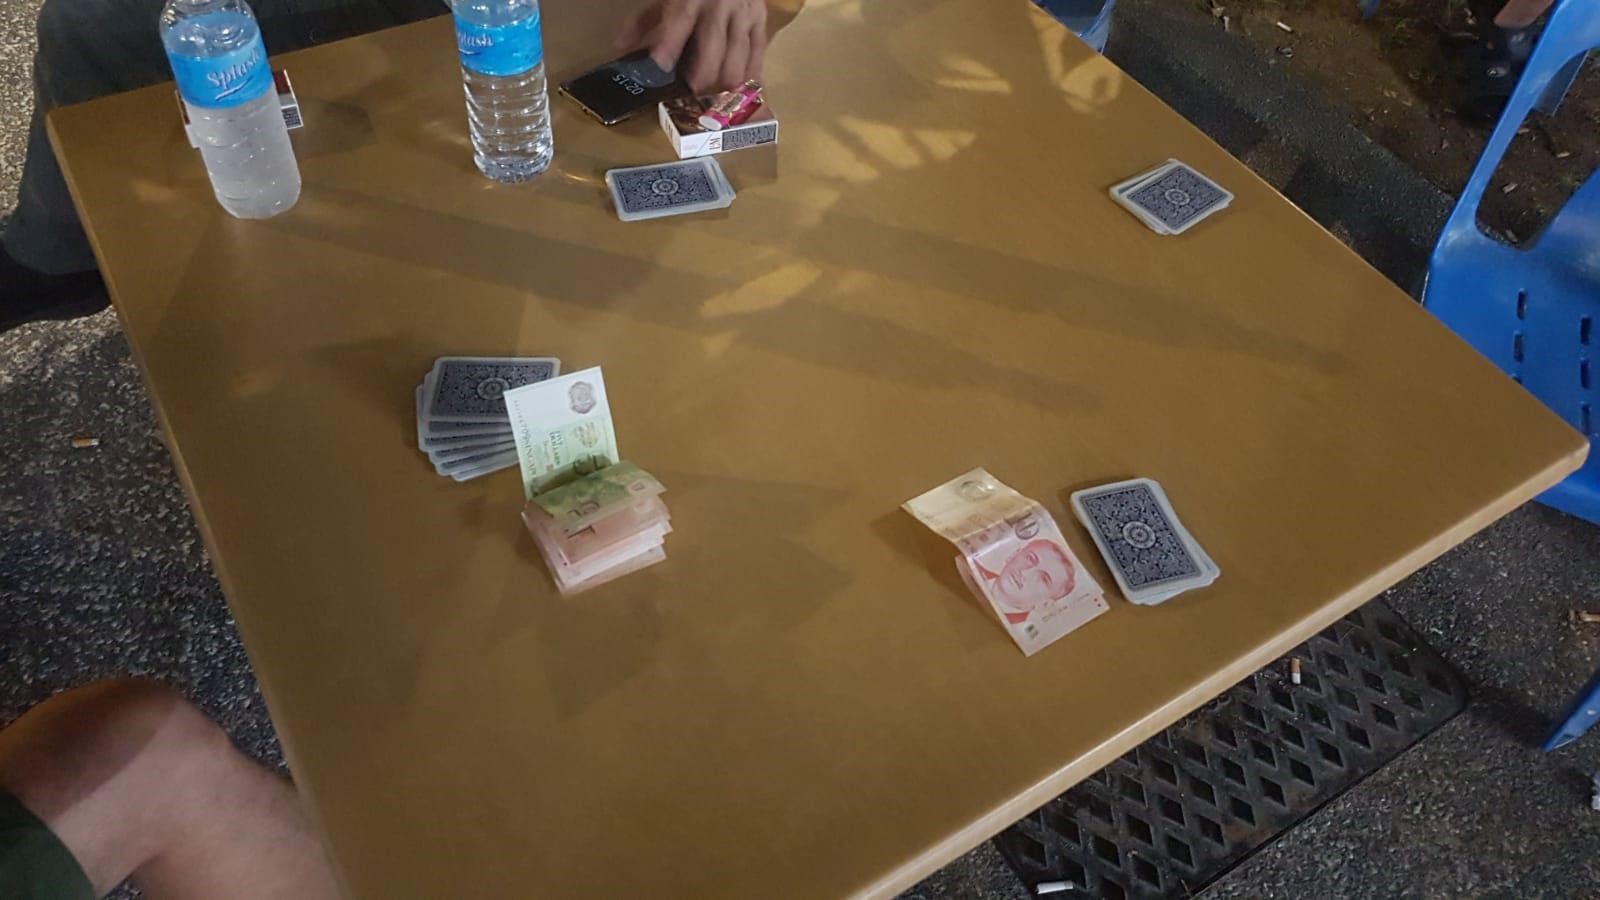 20191108_ARREST_ENFORCEMENT_OPERATIONS_AGAINST_VICE_AND_ILLEGAL_GAMBLING_ACTIVITIES_E